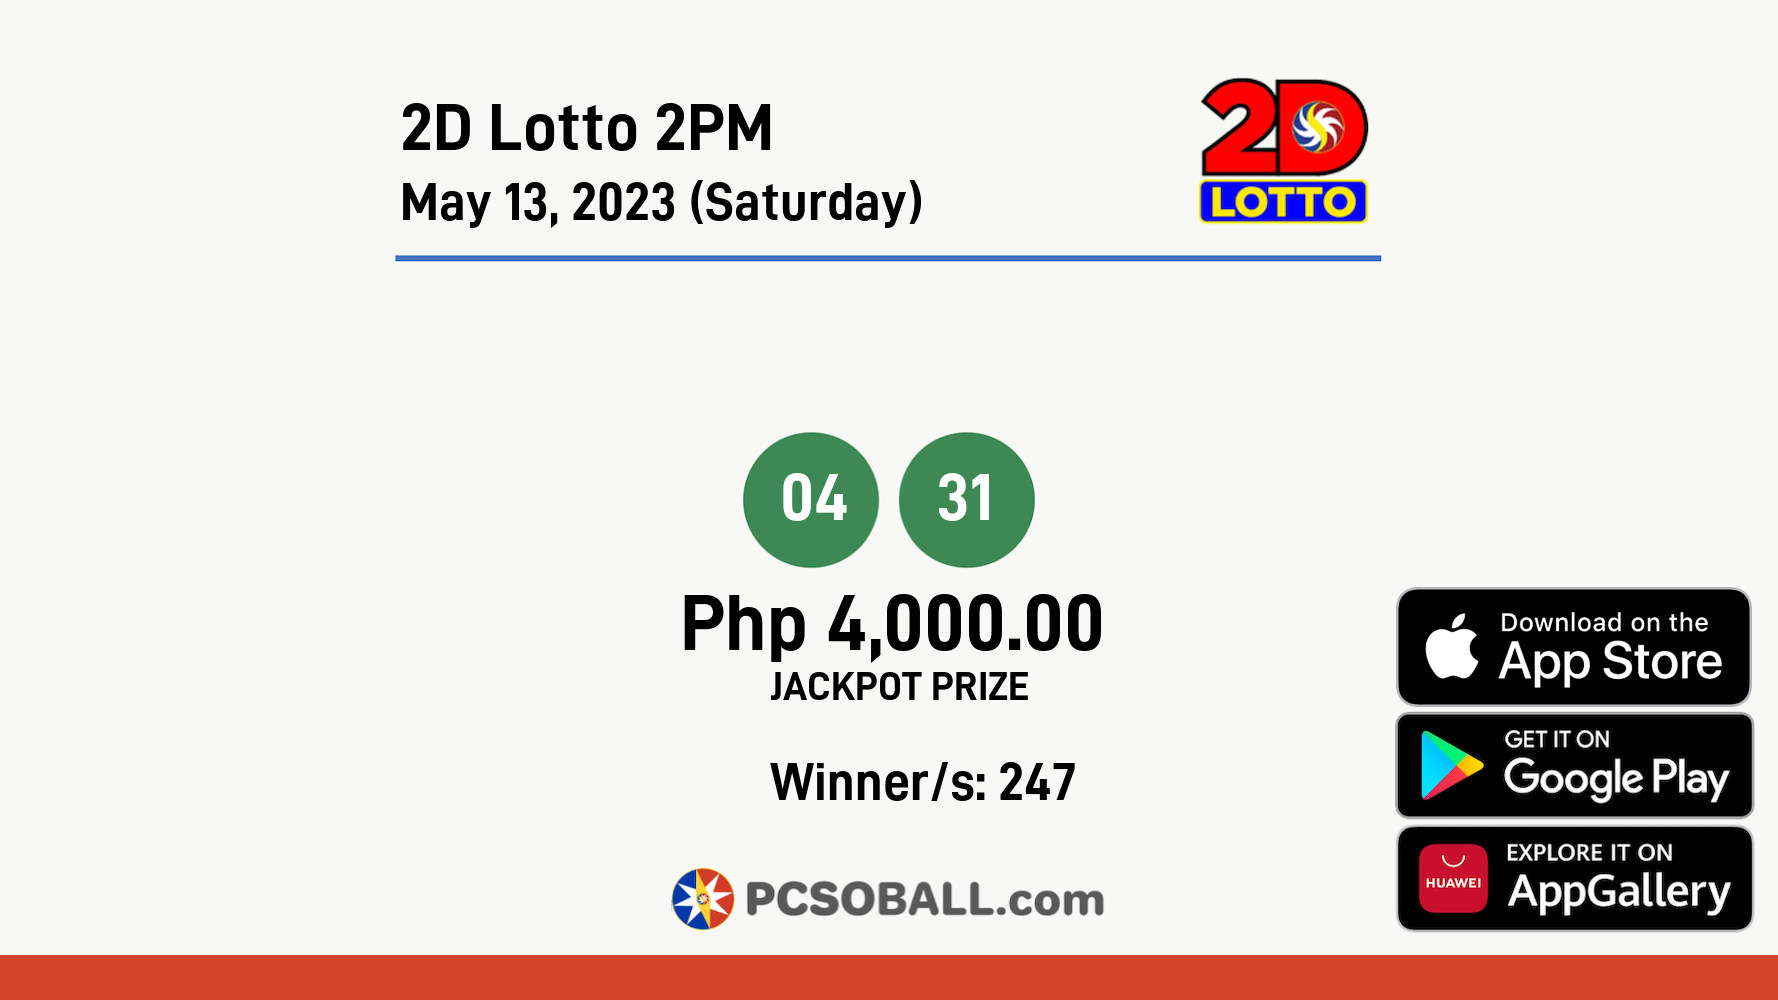 2D Lotto 2PM May 13, 2023 (Saturday) Result